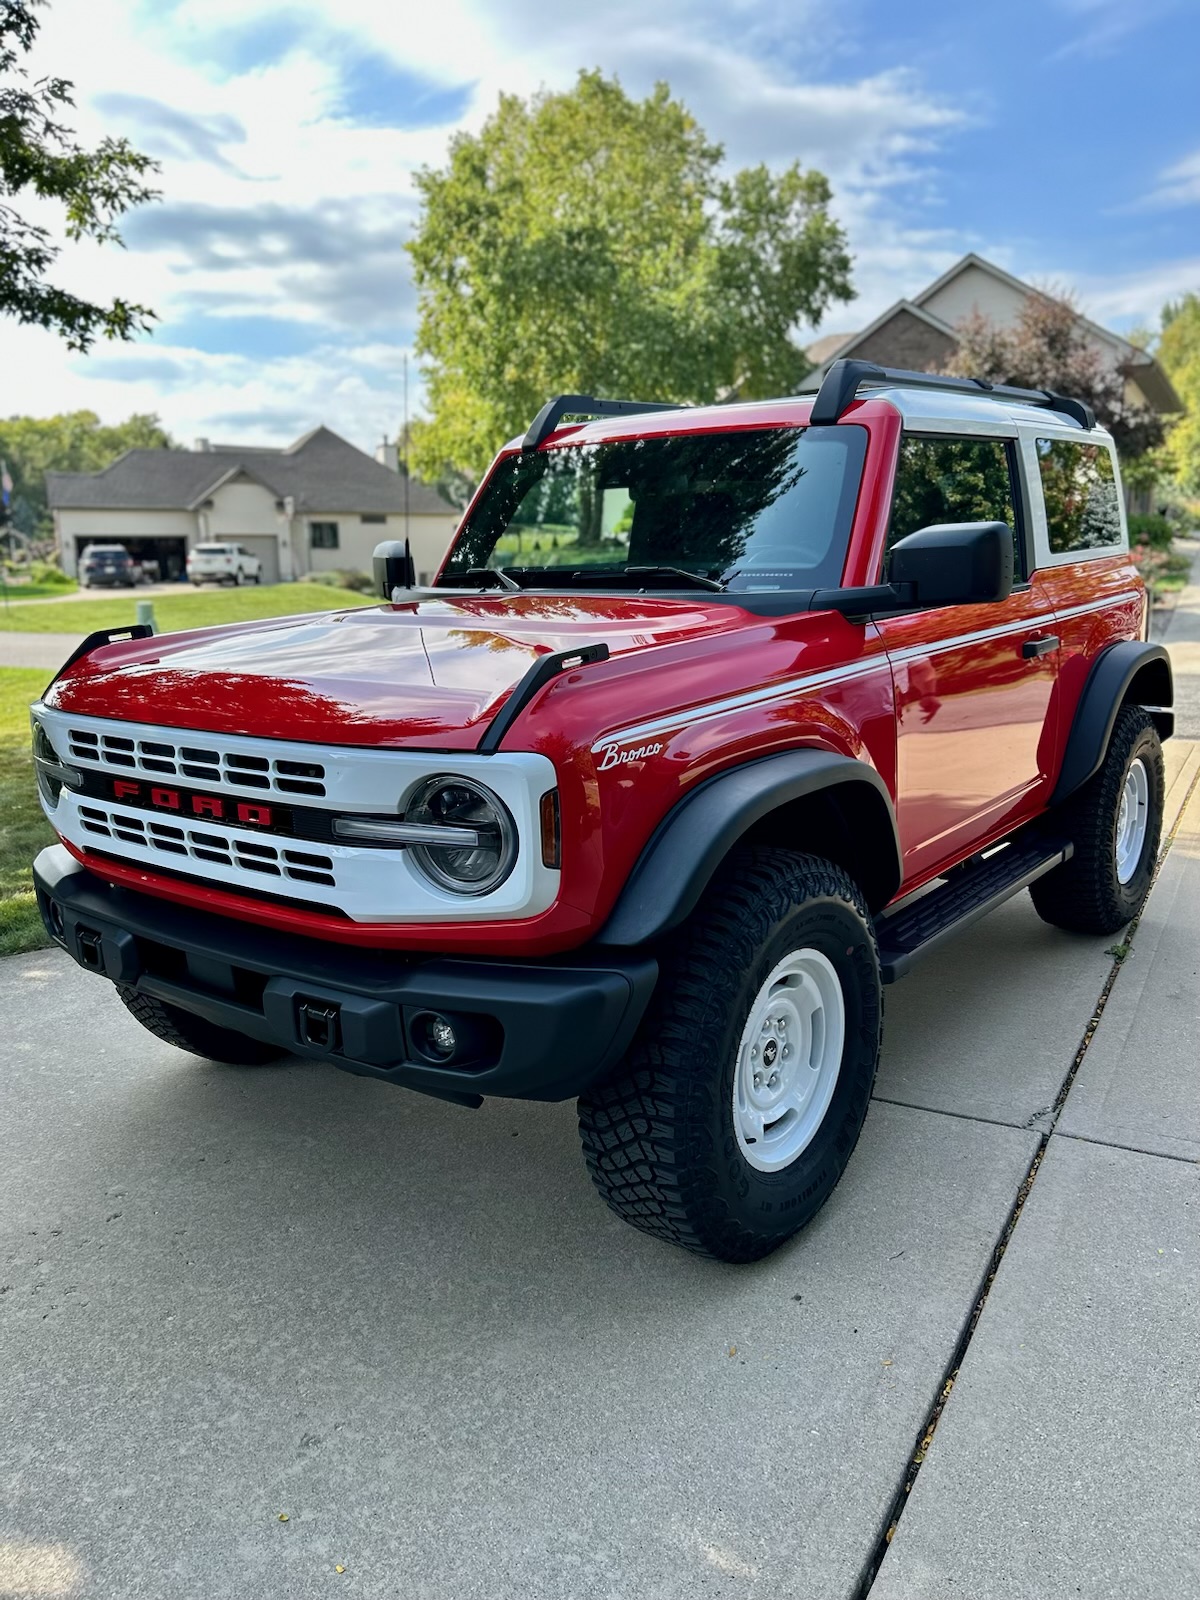 Ford Bronco Throwback Thursday!!! Let's see those trade-ins vs what you have now photos!!! IMG_0272